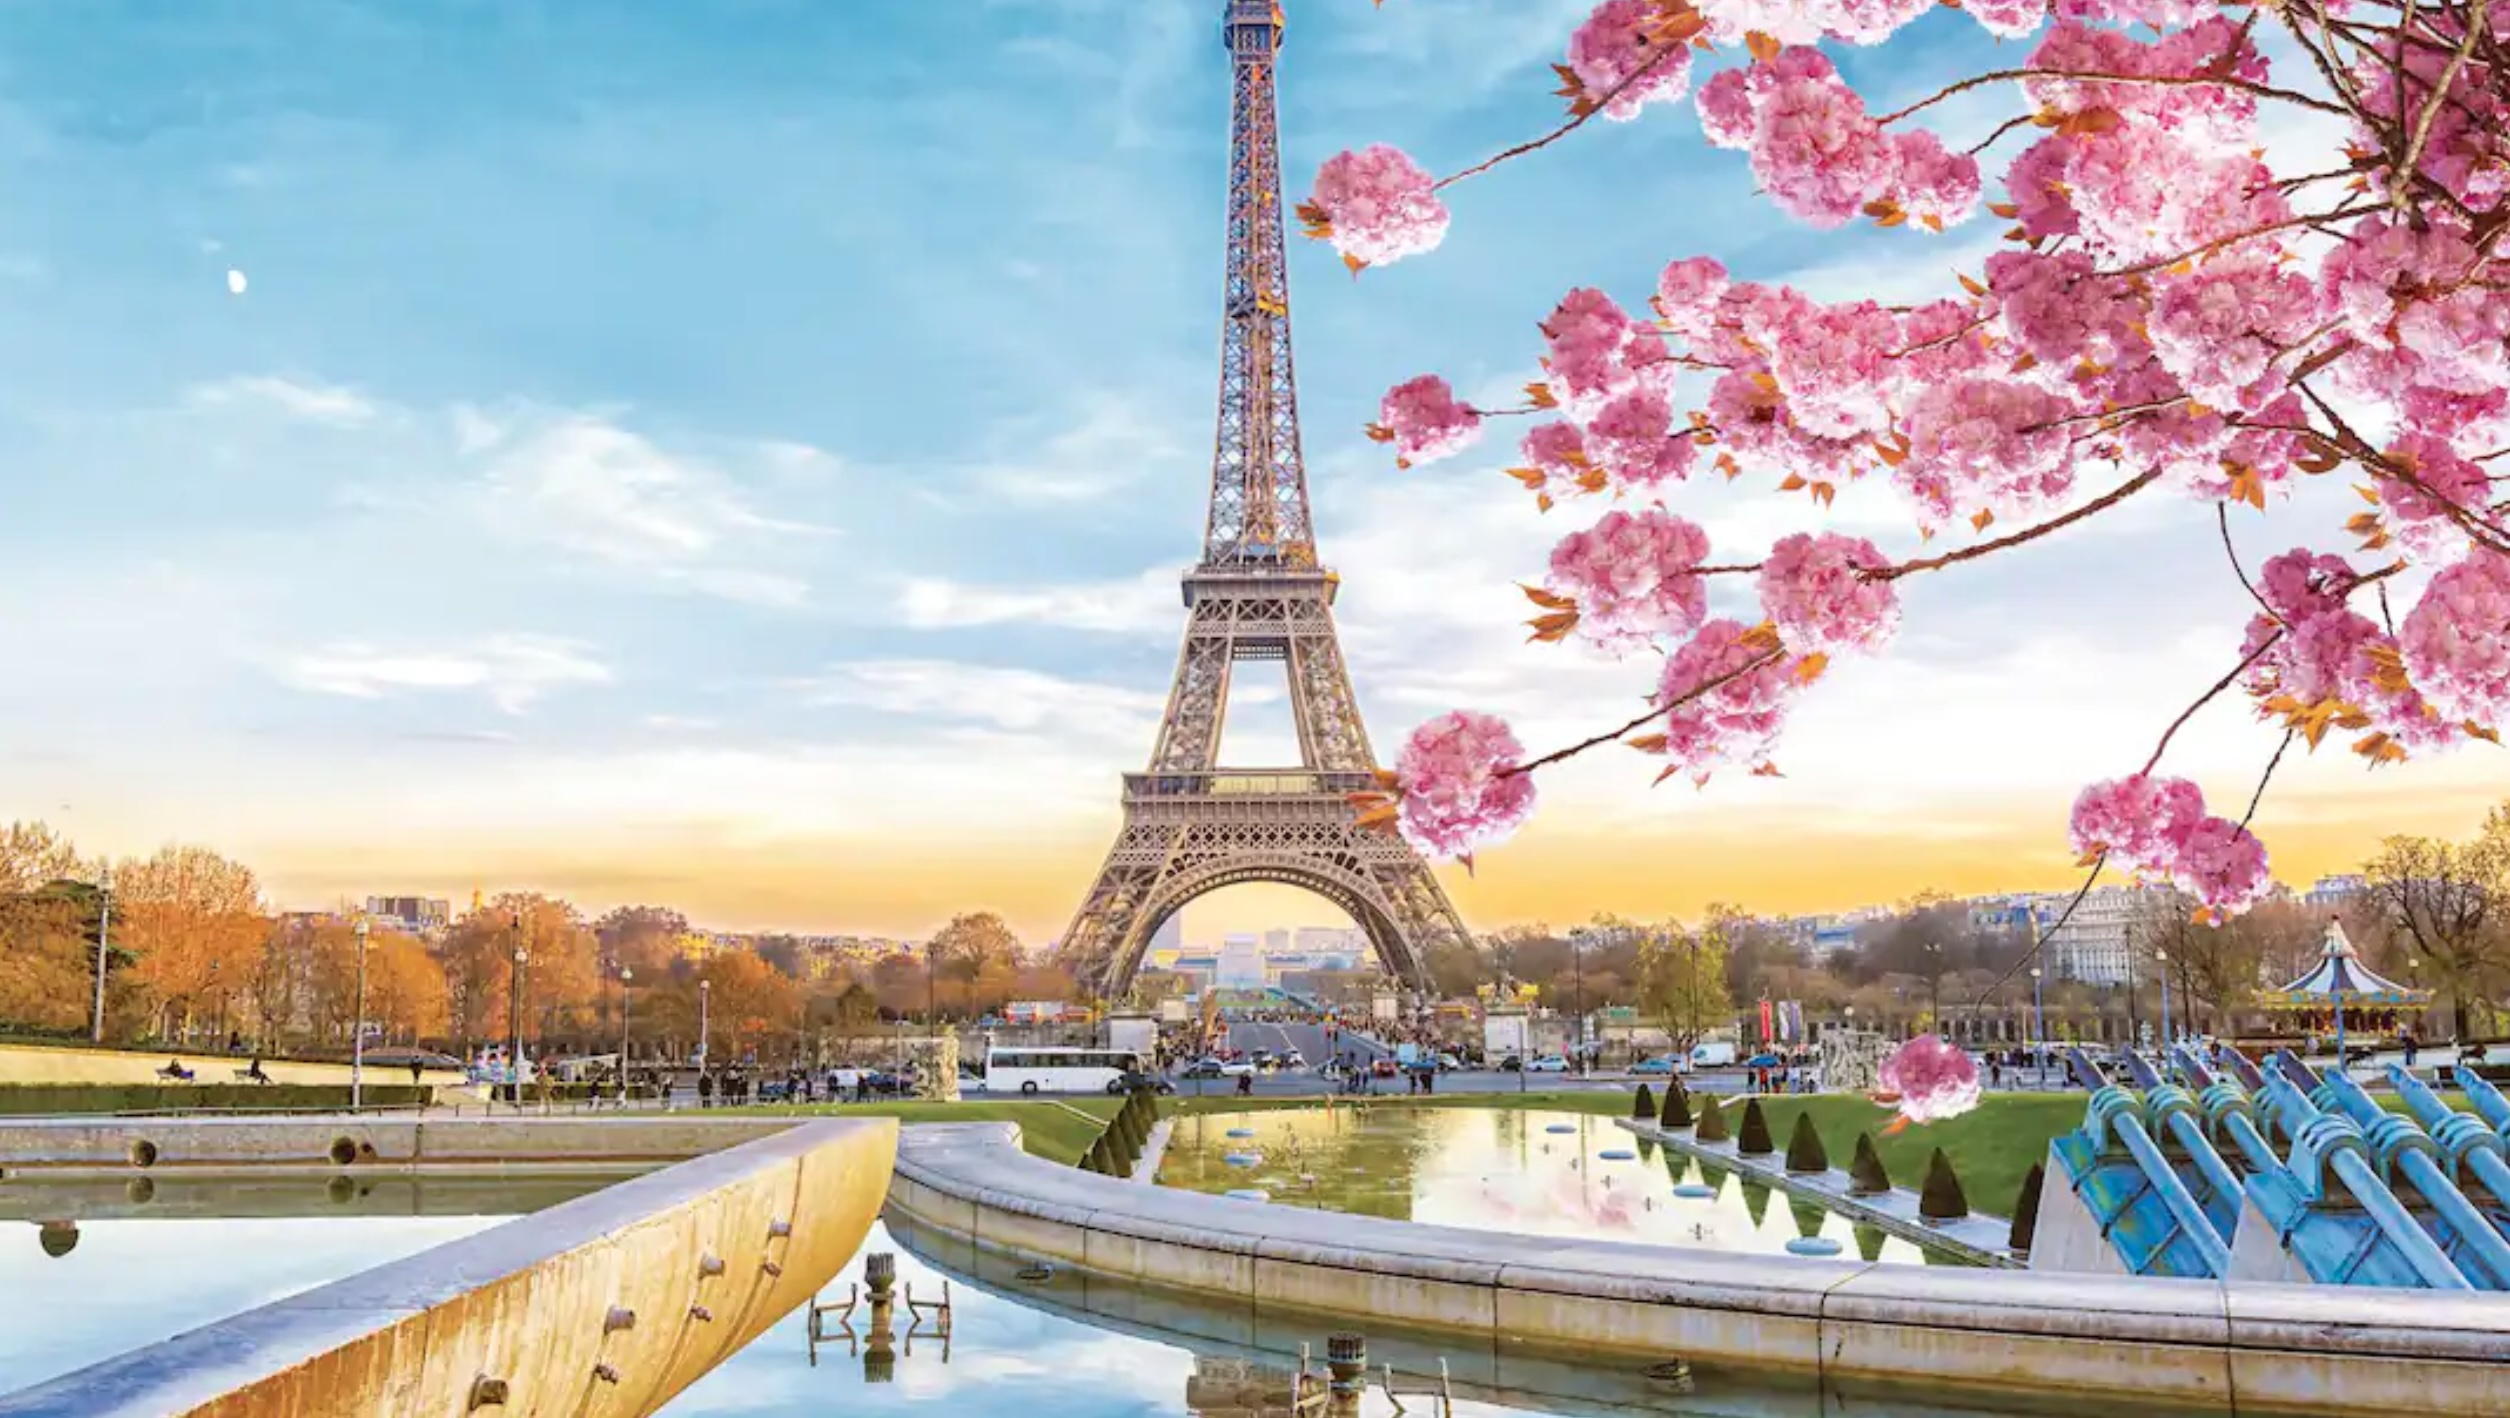 Eiffel Tower in the spring morning in Paris, France